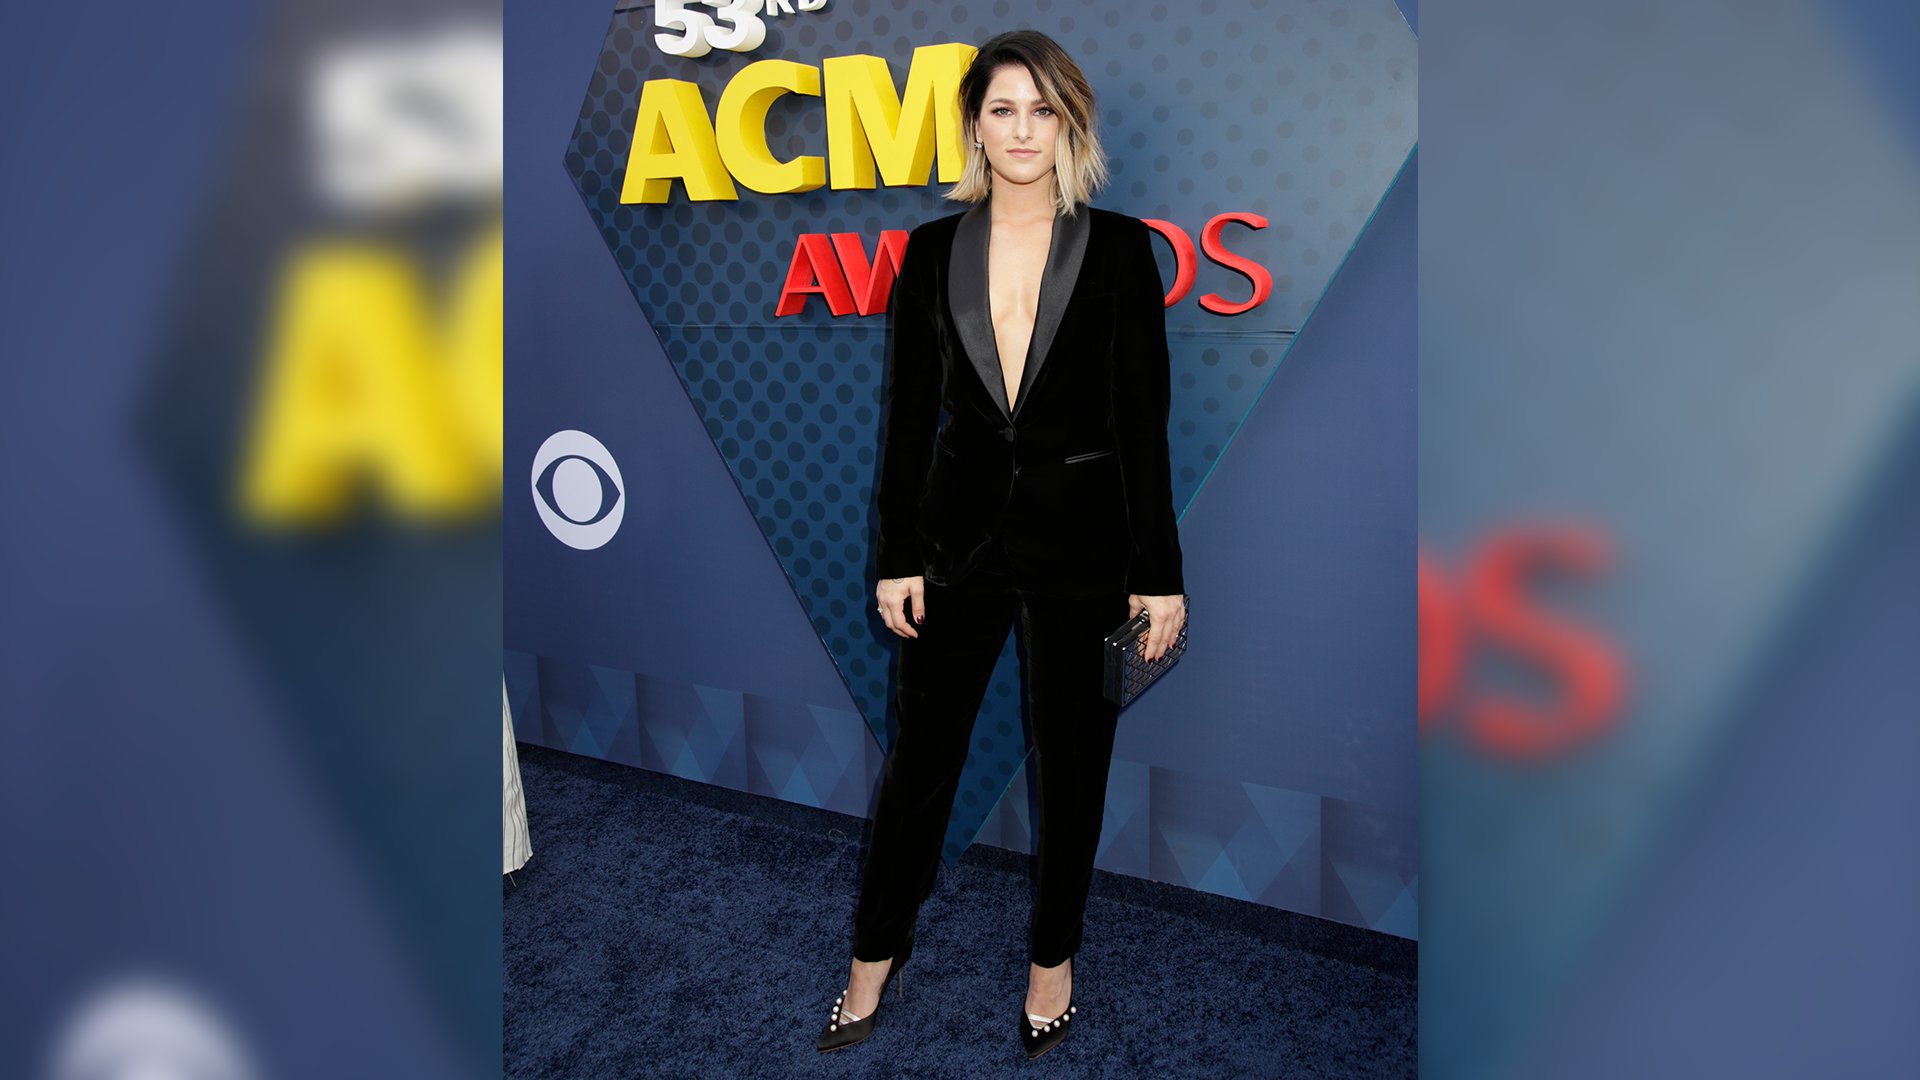 Cassadee Pope takes the idea of black tie to another level in this gorgeous tuxedo suit.